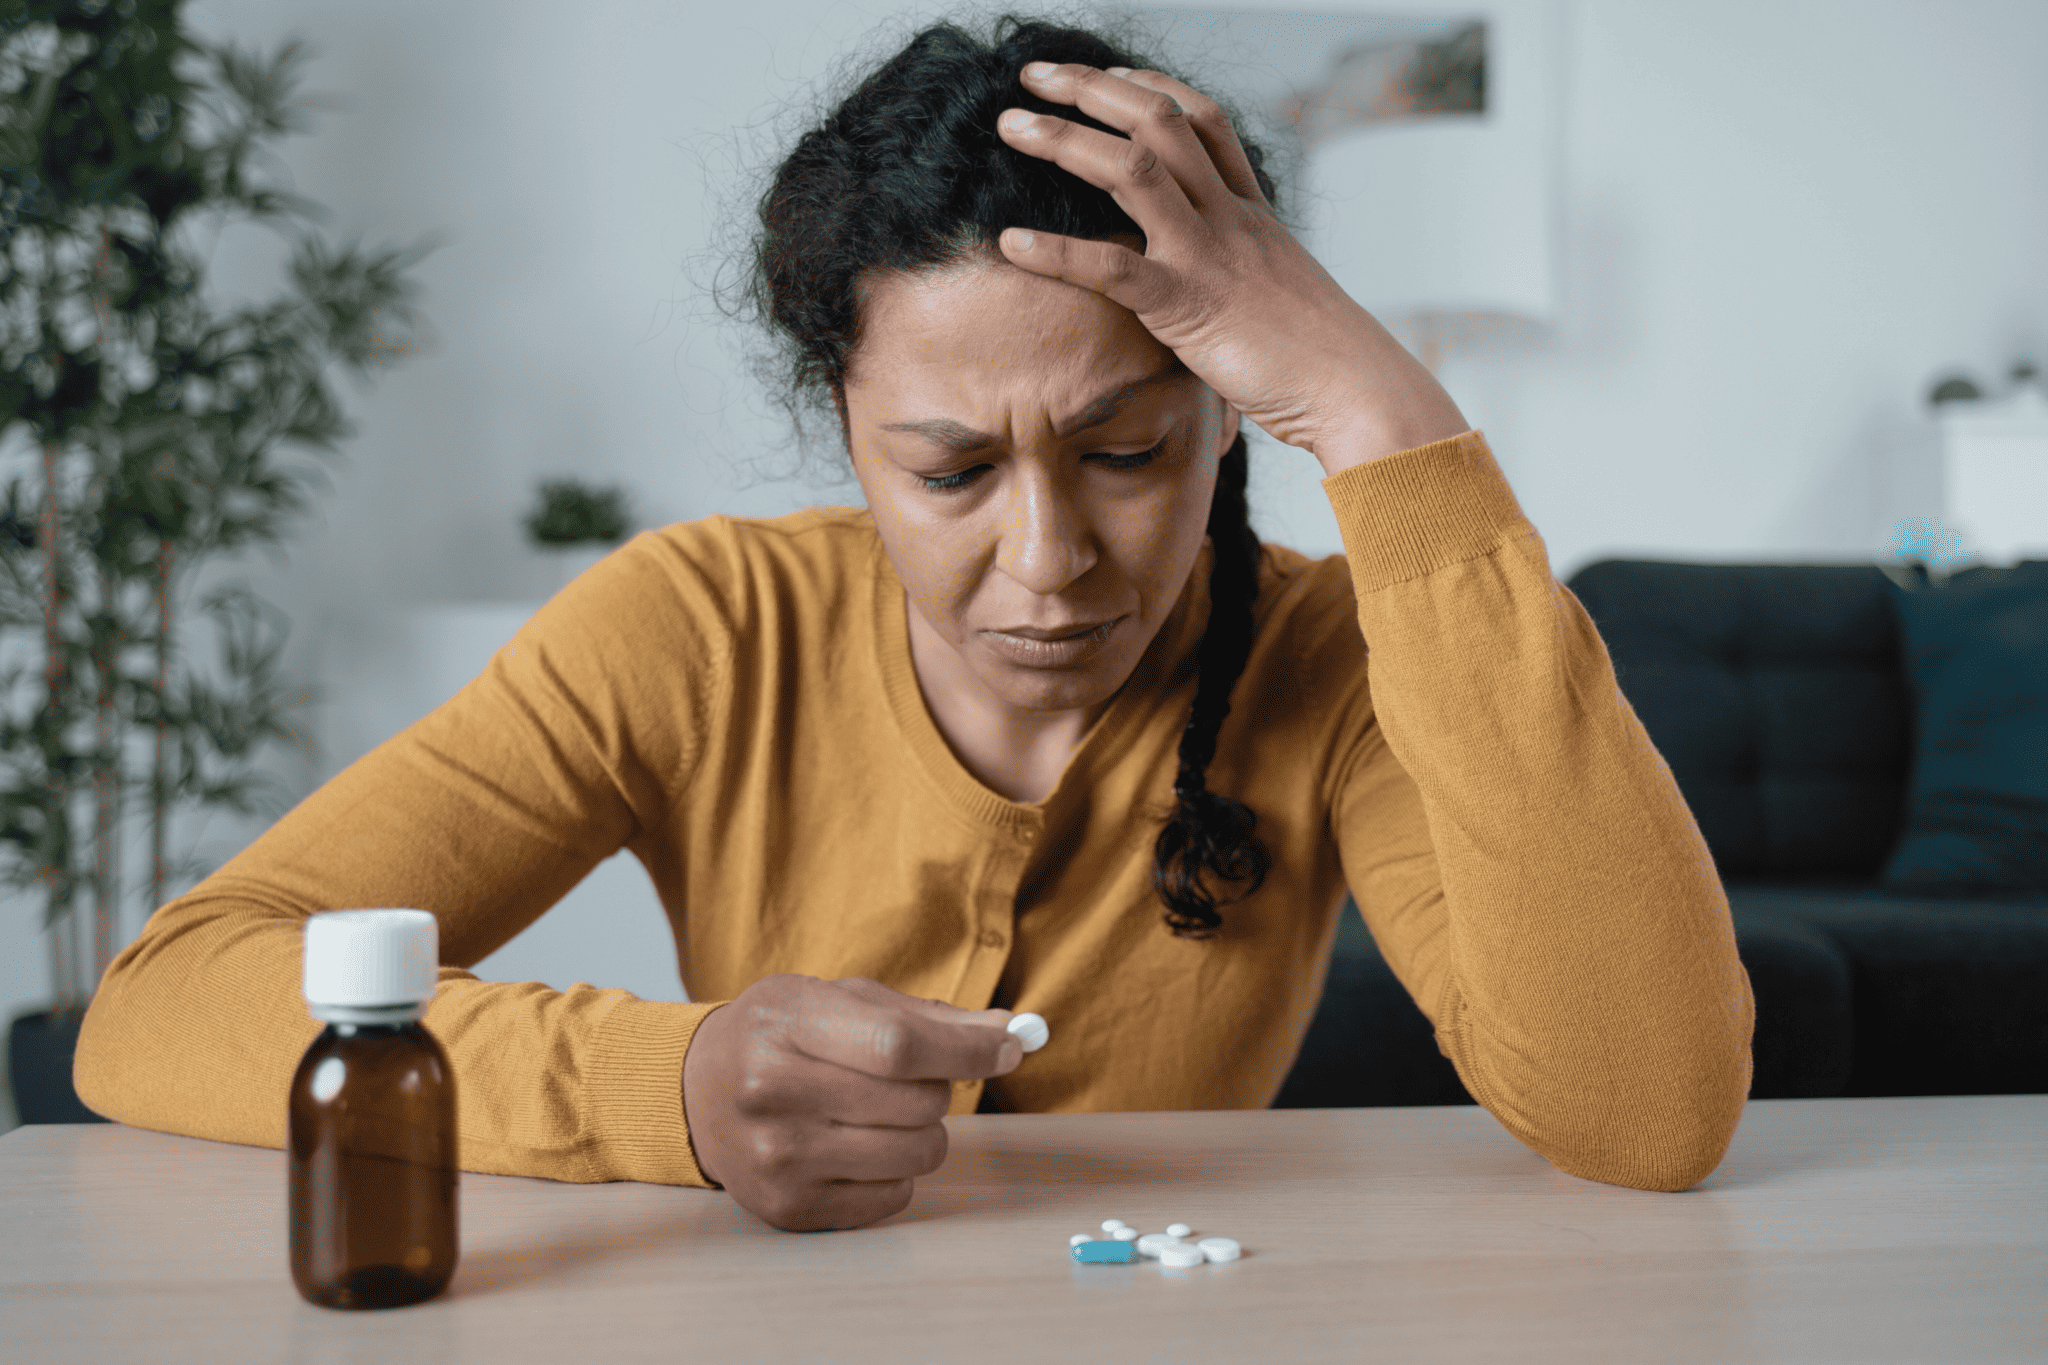 Vicodin addiction treatment learn more about Vicodin abuse due to chronic pain and pain management. An opioid hydrocodone substance use disorder due to a typically prescribed and medically monitored Vicodin.